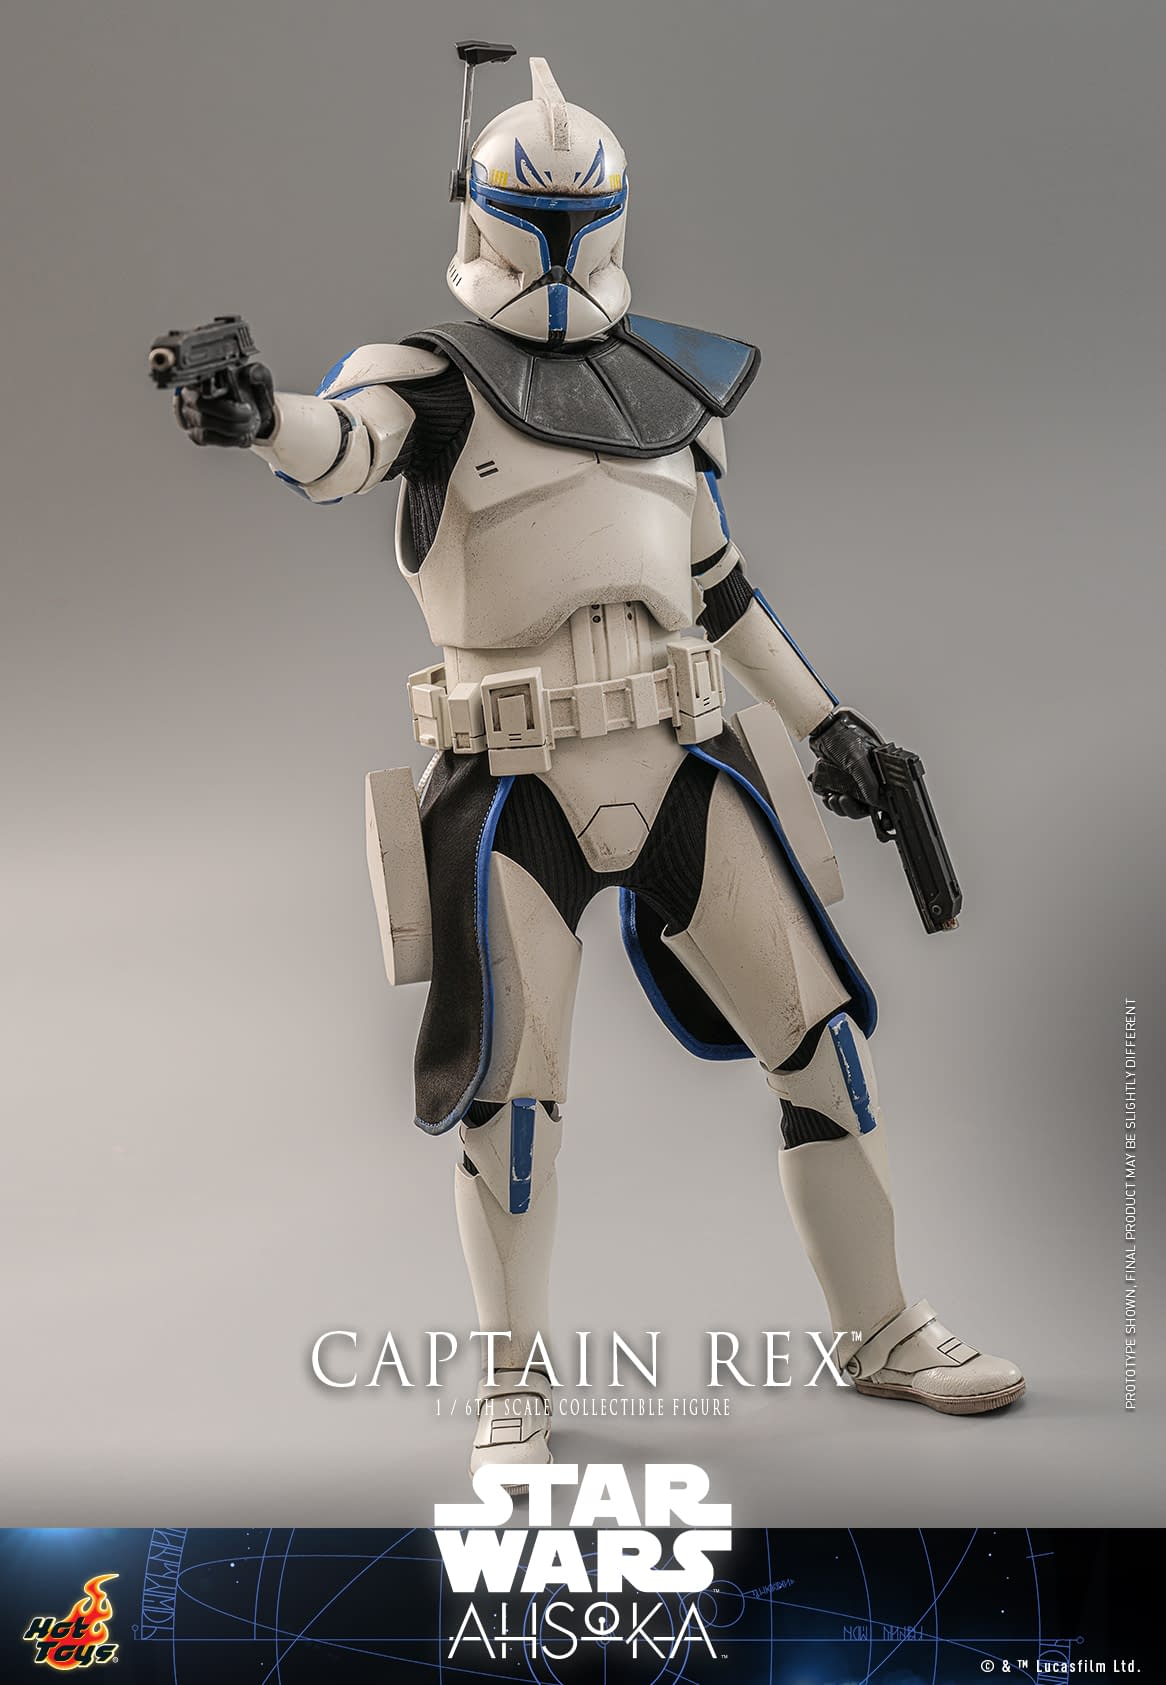 Captain Rex Returns to Hot Toys with New Star Wars 1/6 Scale Release9